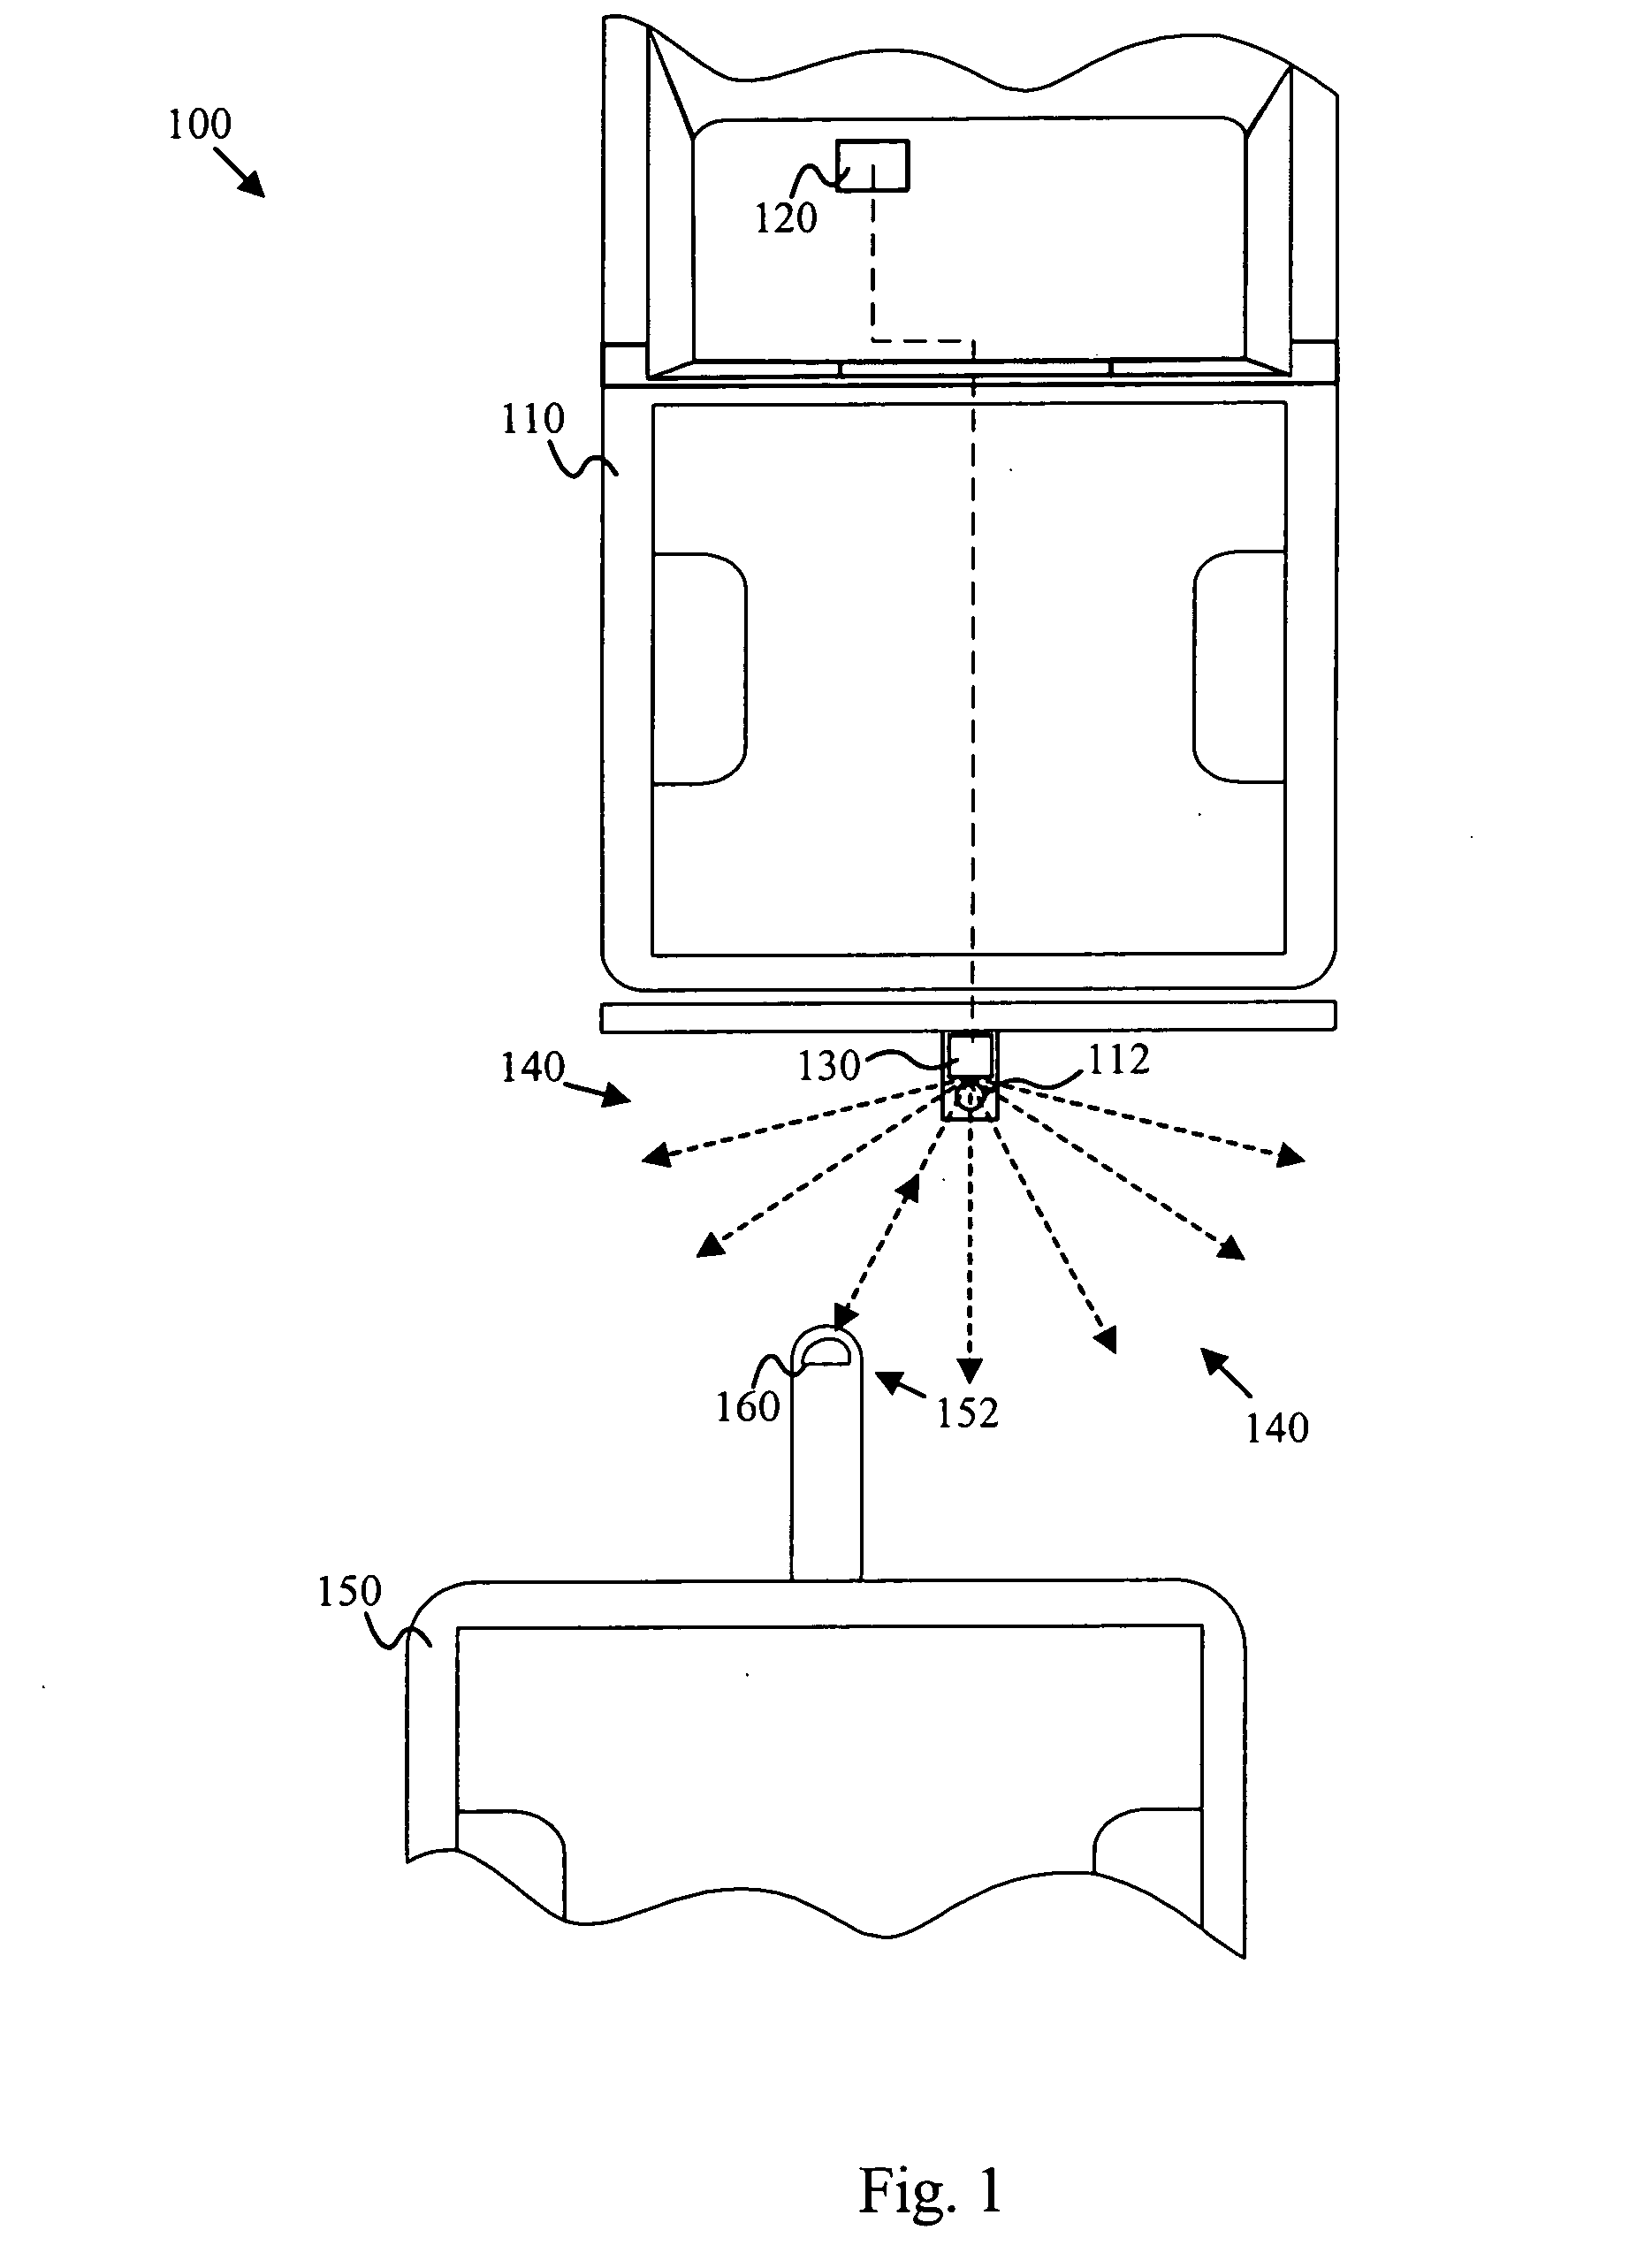 Apparatus method and system for docking a trailer to a towing vehicle